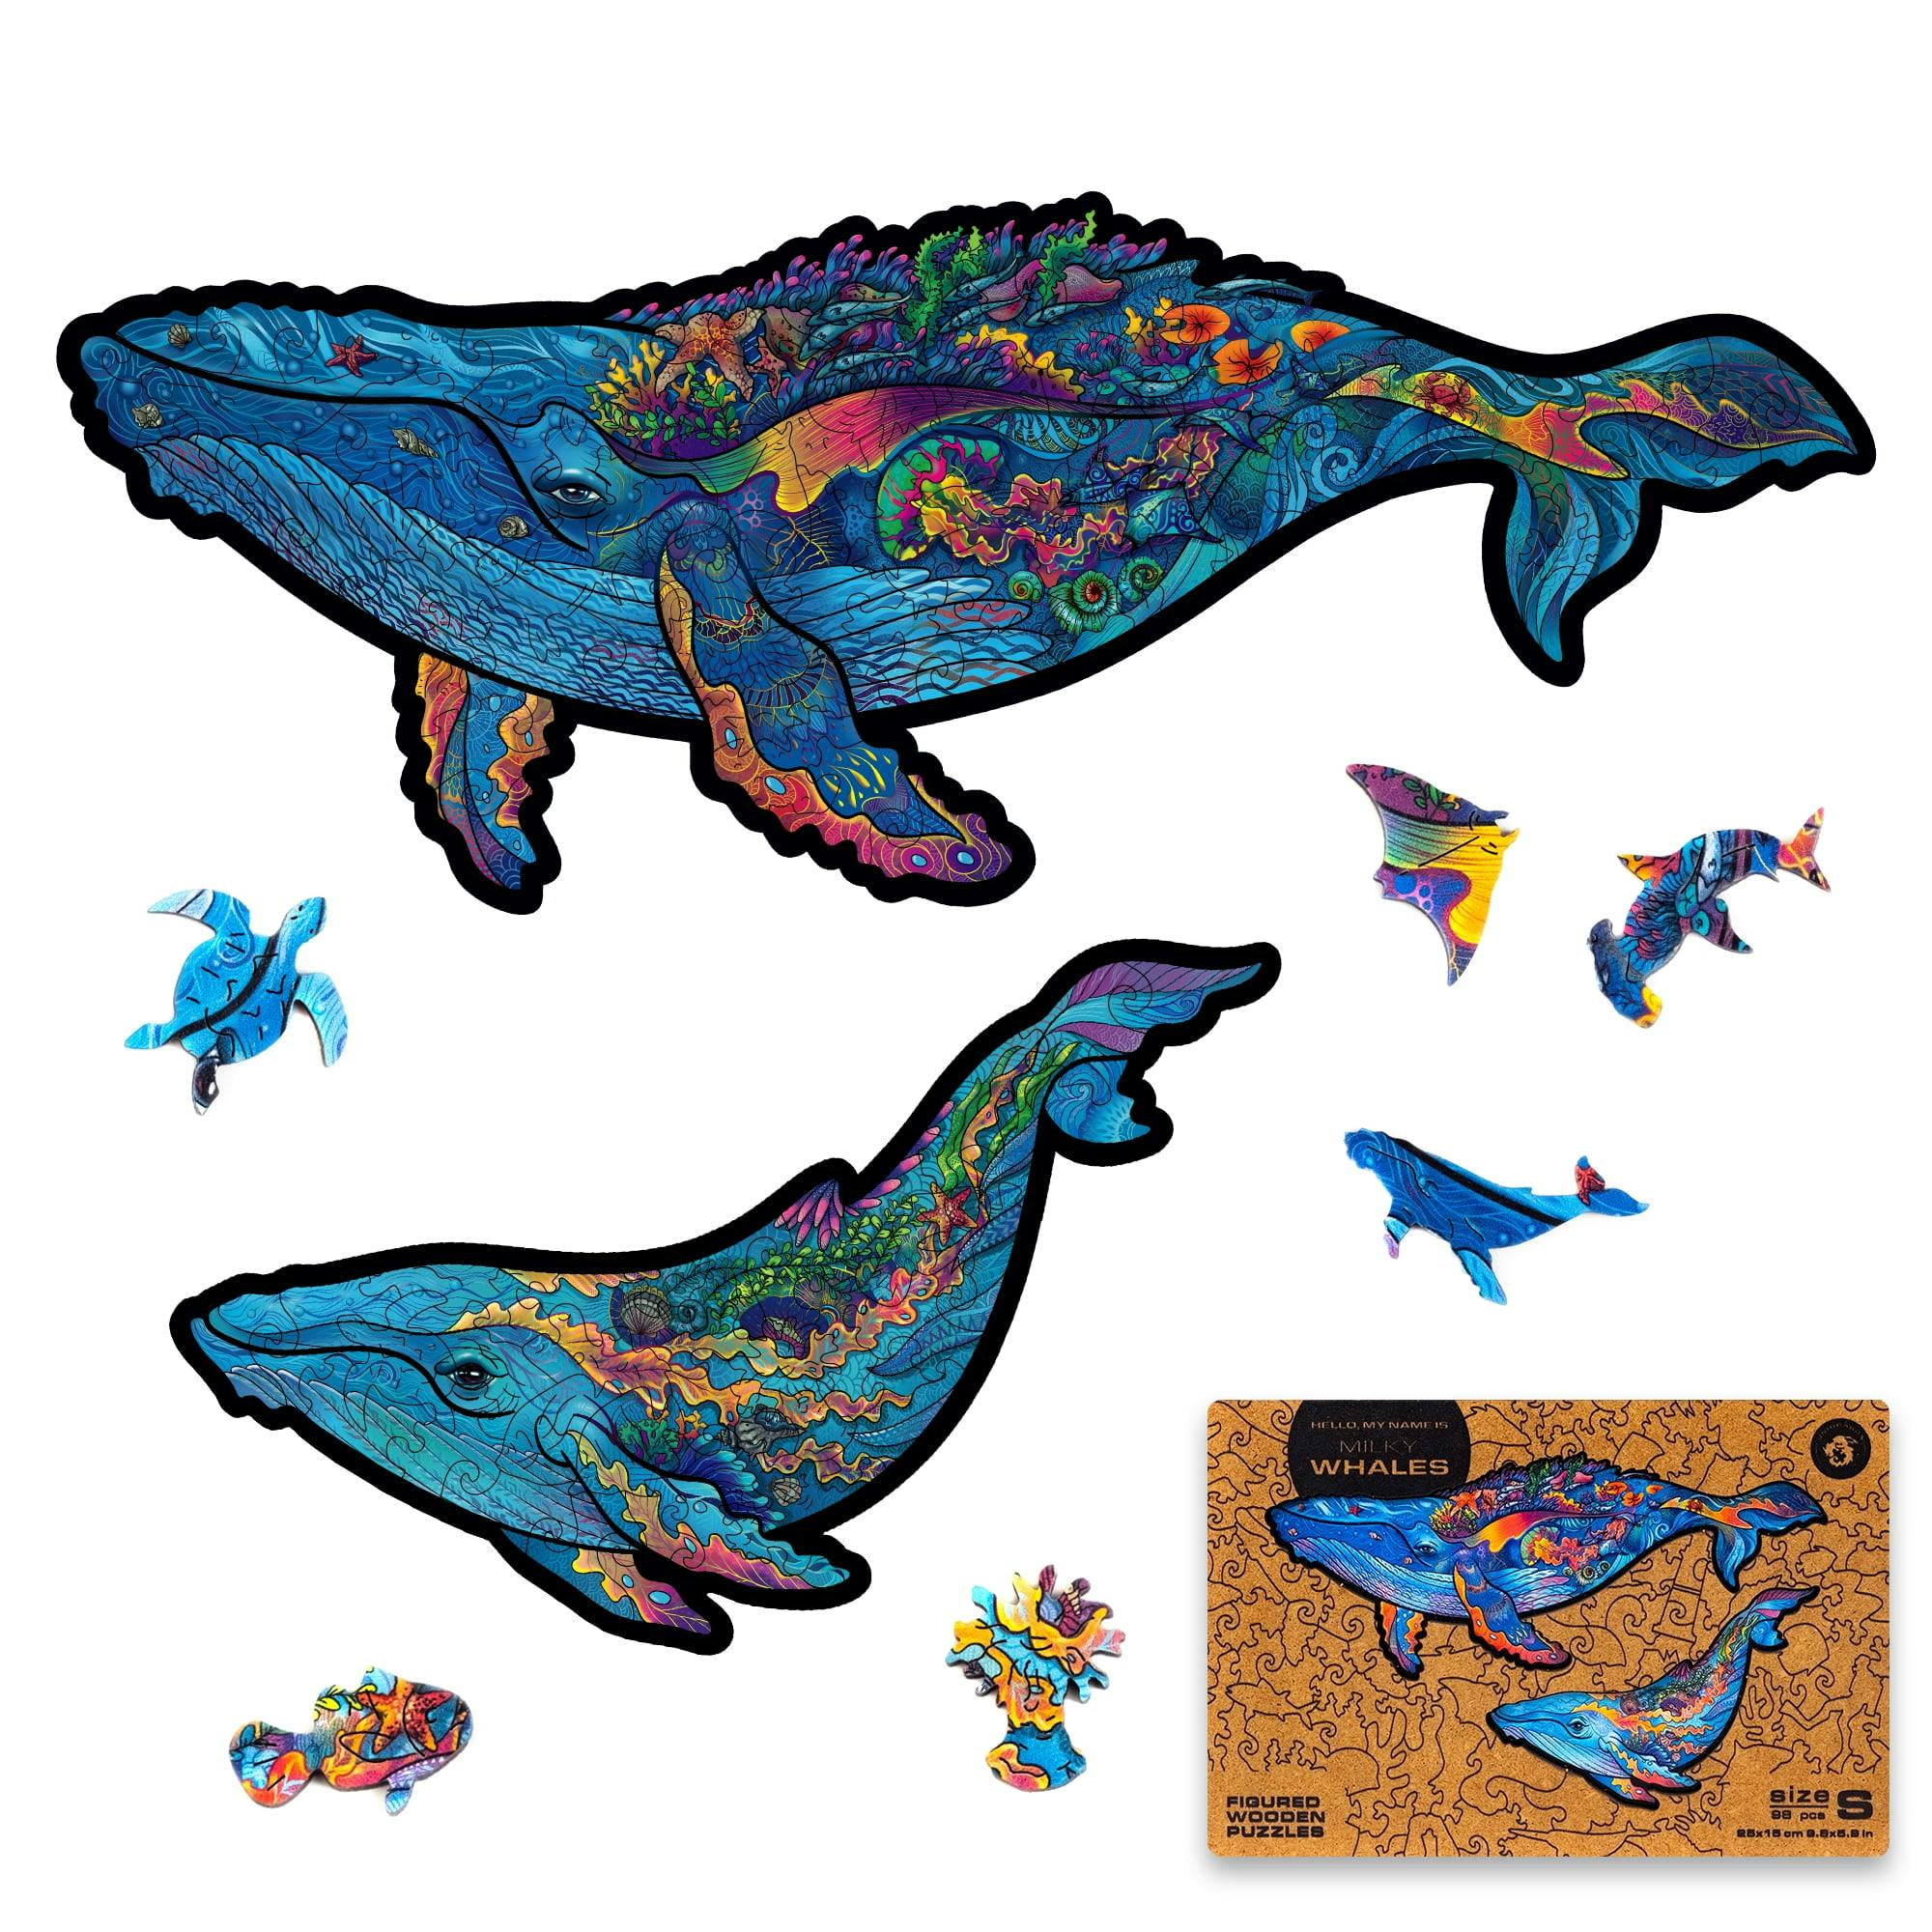 Galactic Oceanic Creatures Wooden Jigsaw Puzzle - 98 pcs